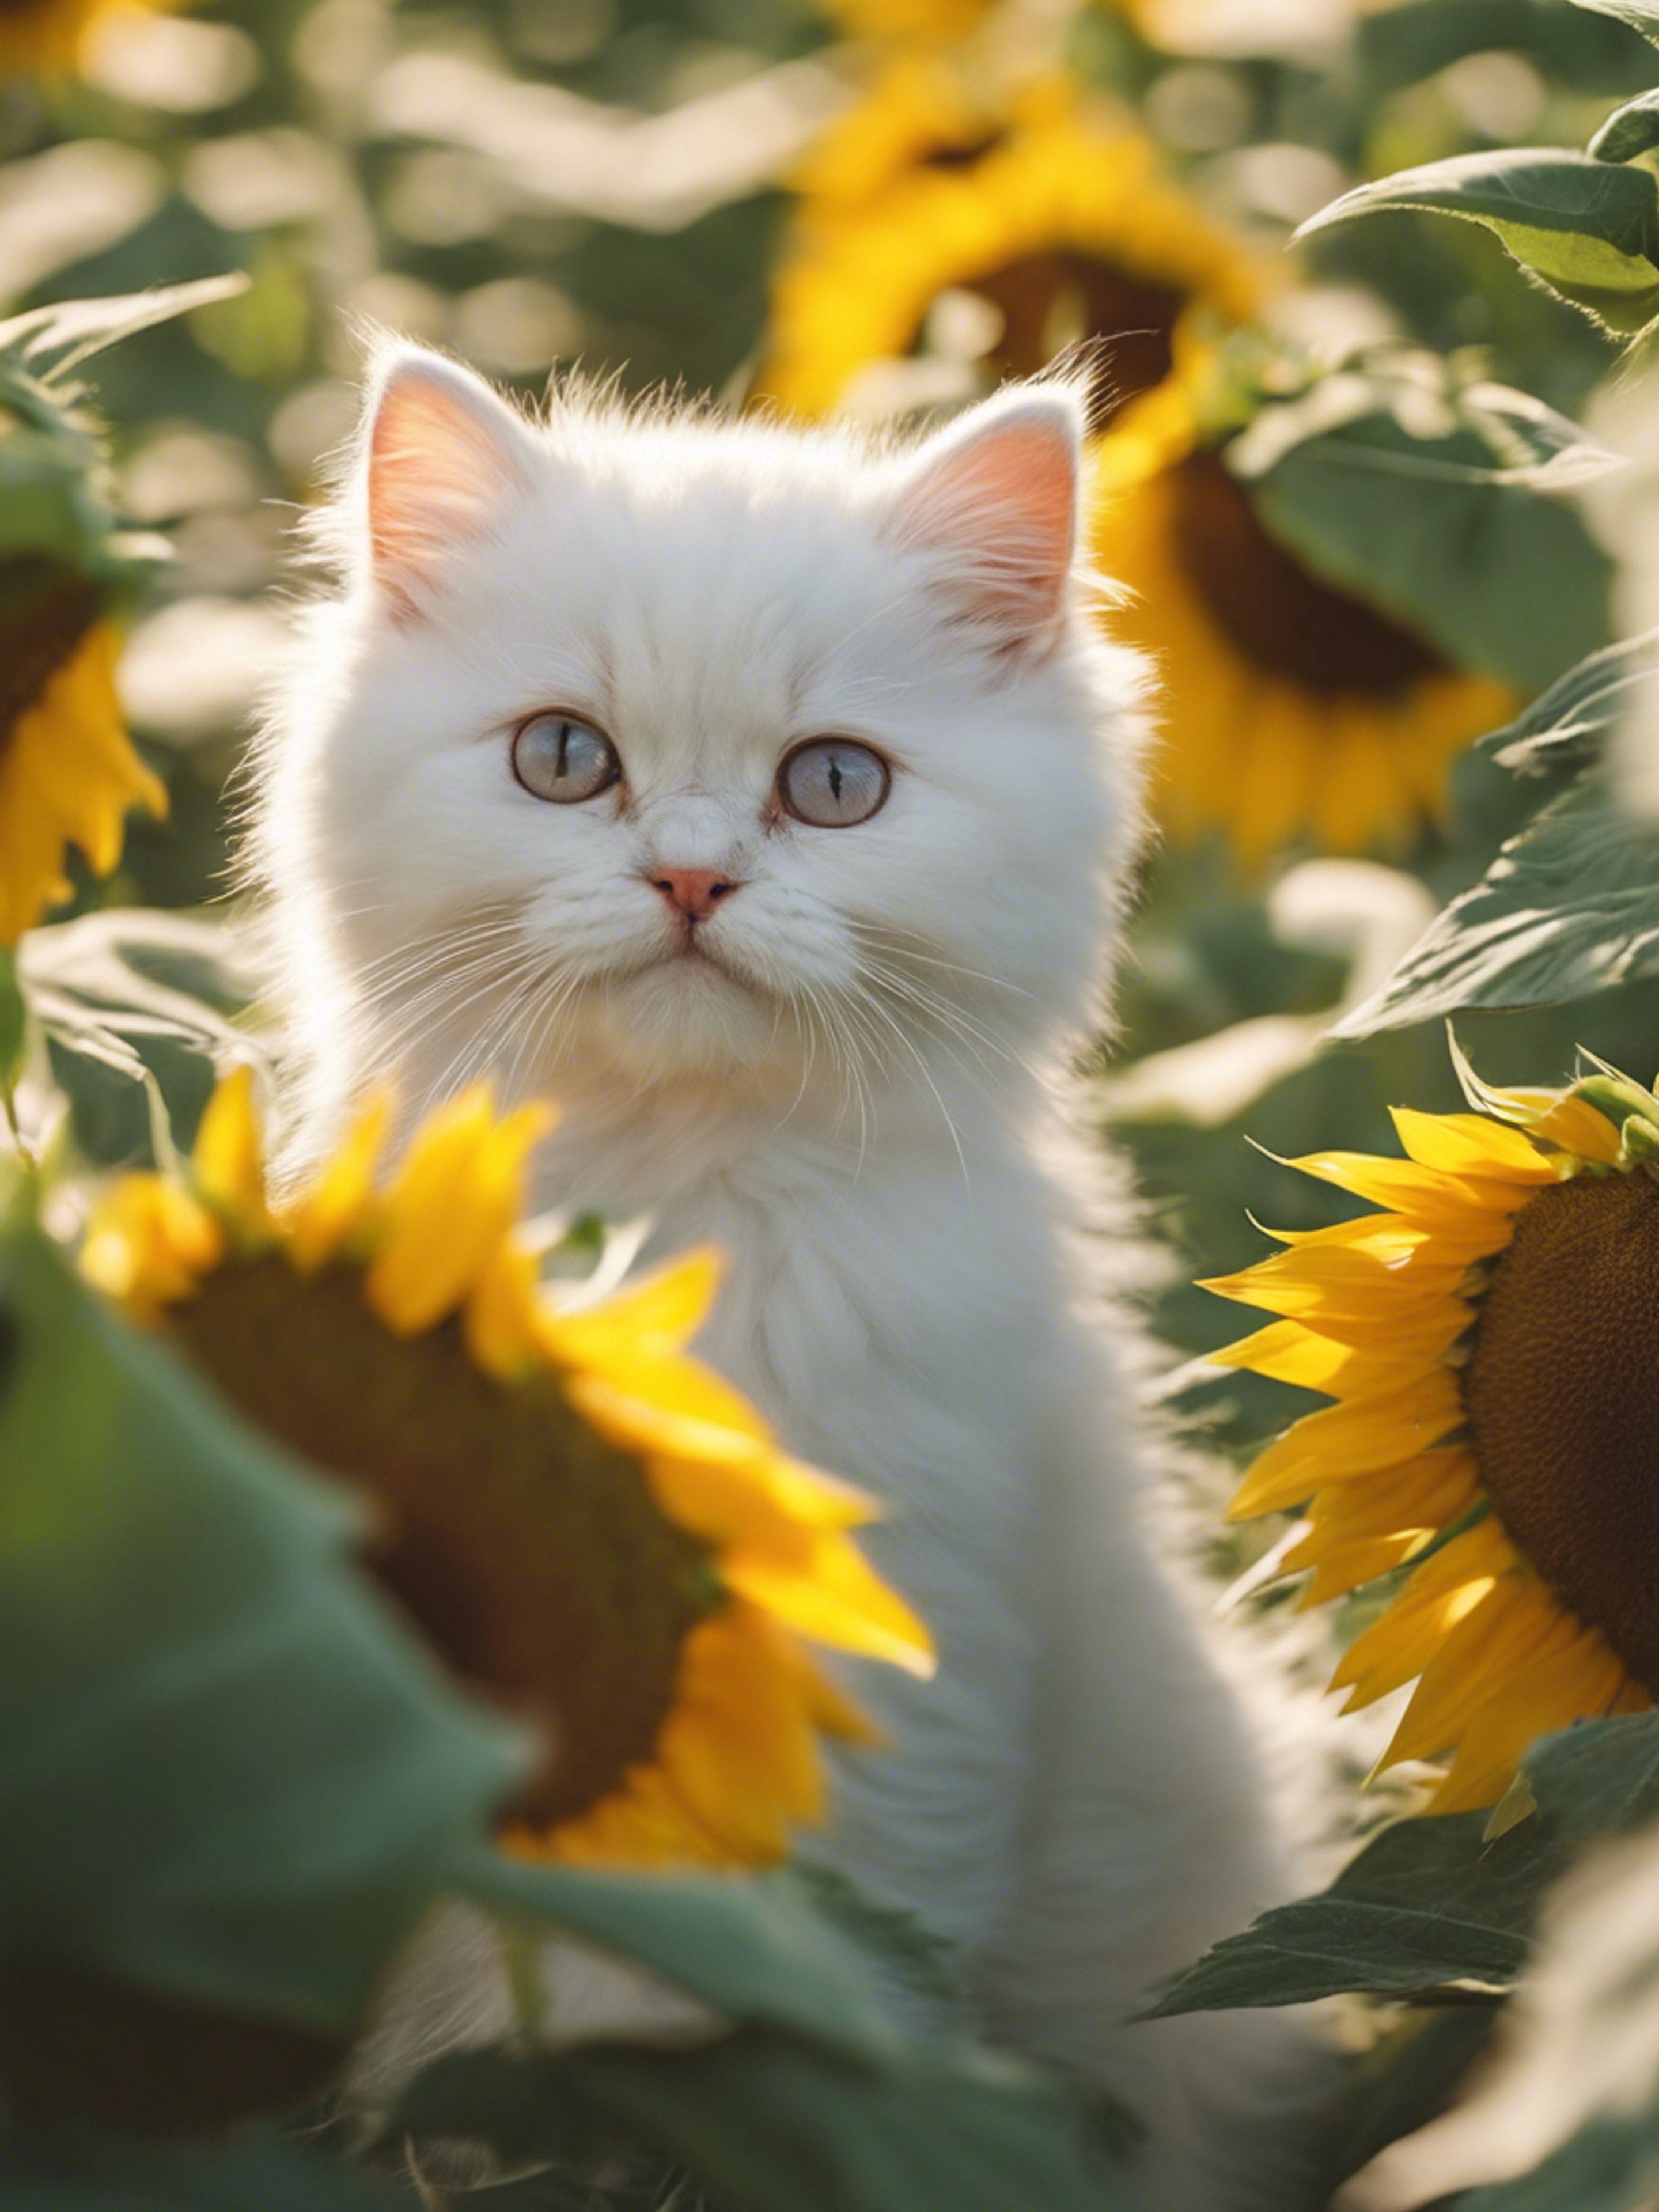 A snow-white Persian kitten playing peek-a-boo among a field of sunflowers on a bright, sunny day. Tapet[783f0584fefb42ff9955]